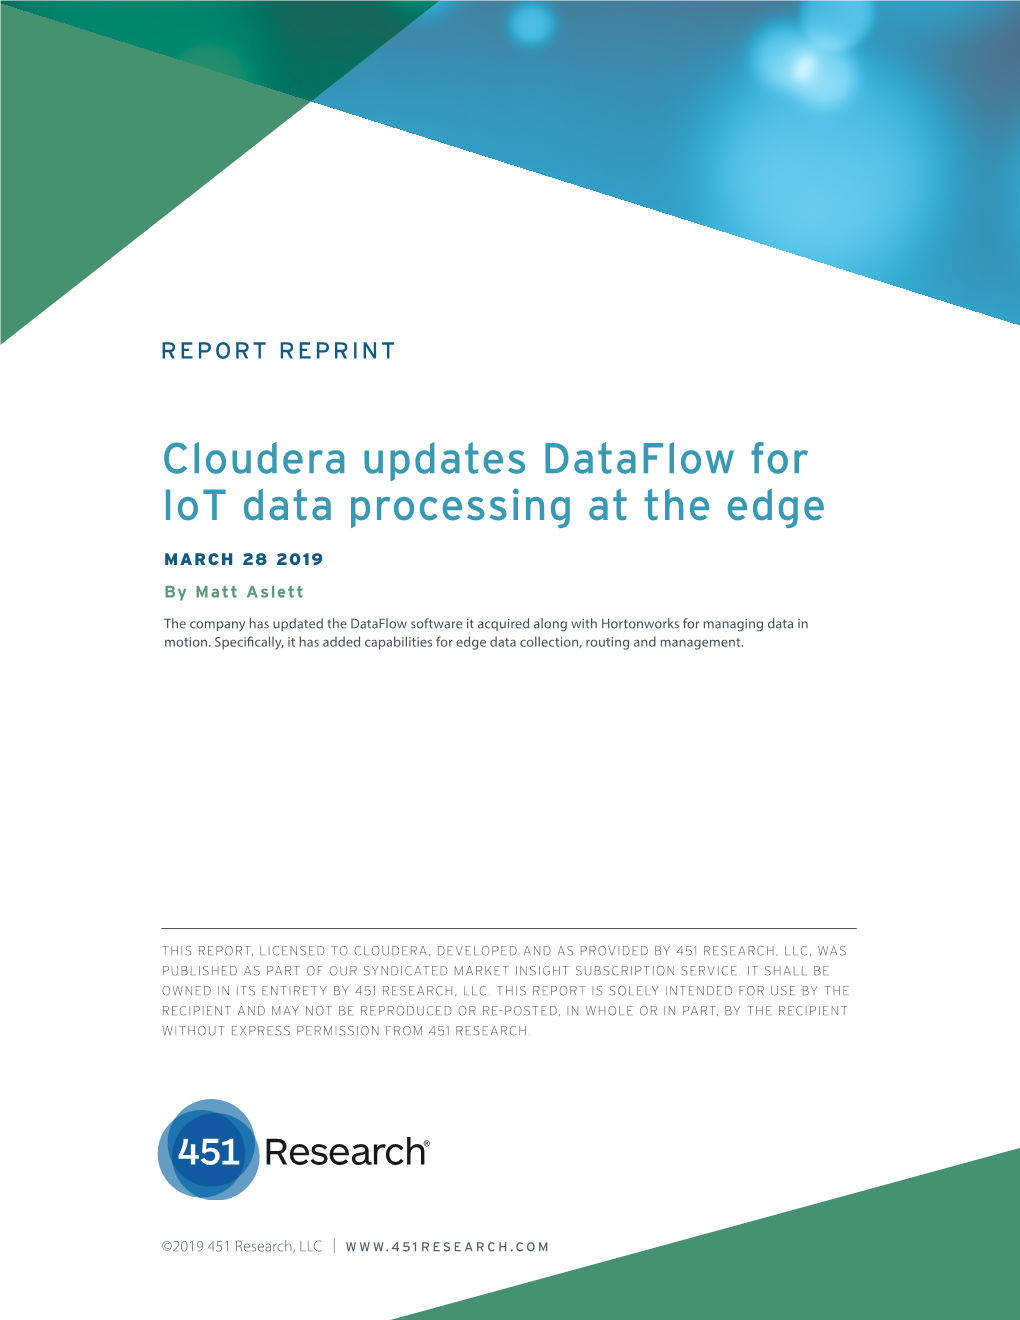 Cloudera Updates Dataflow for Iot Data Processing at the Edge